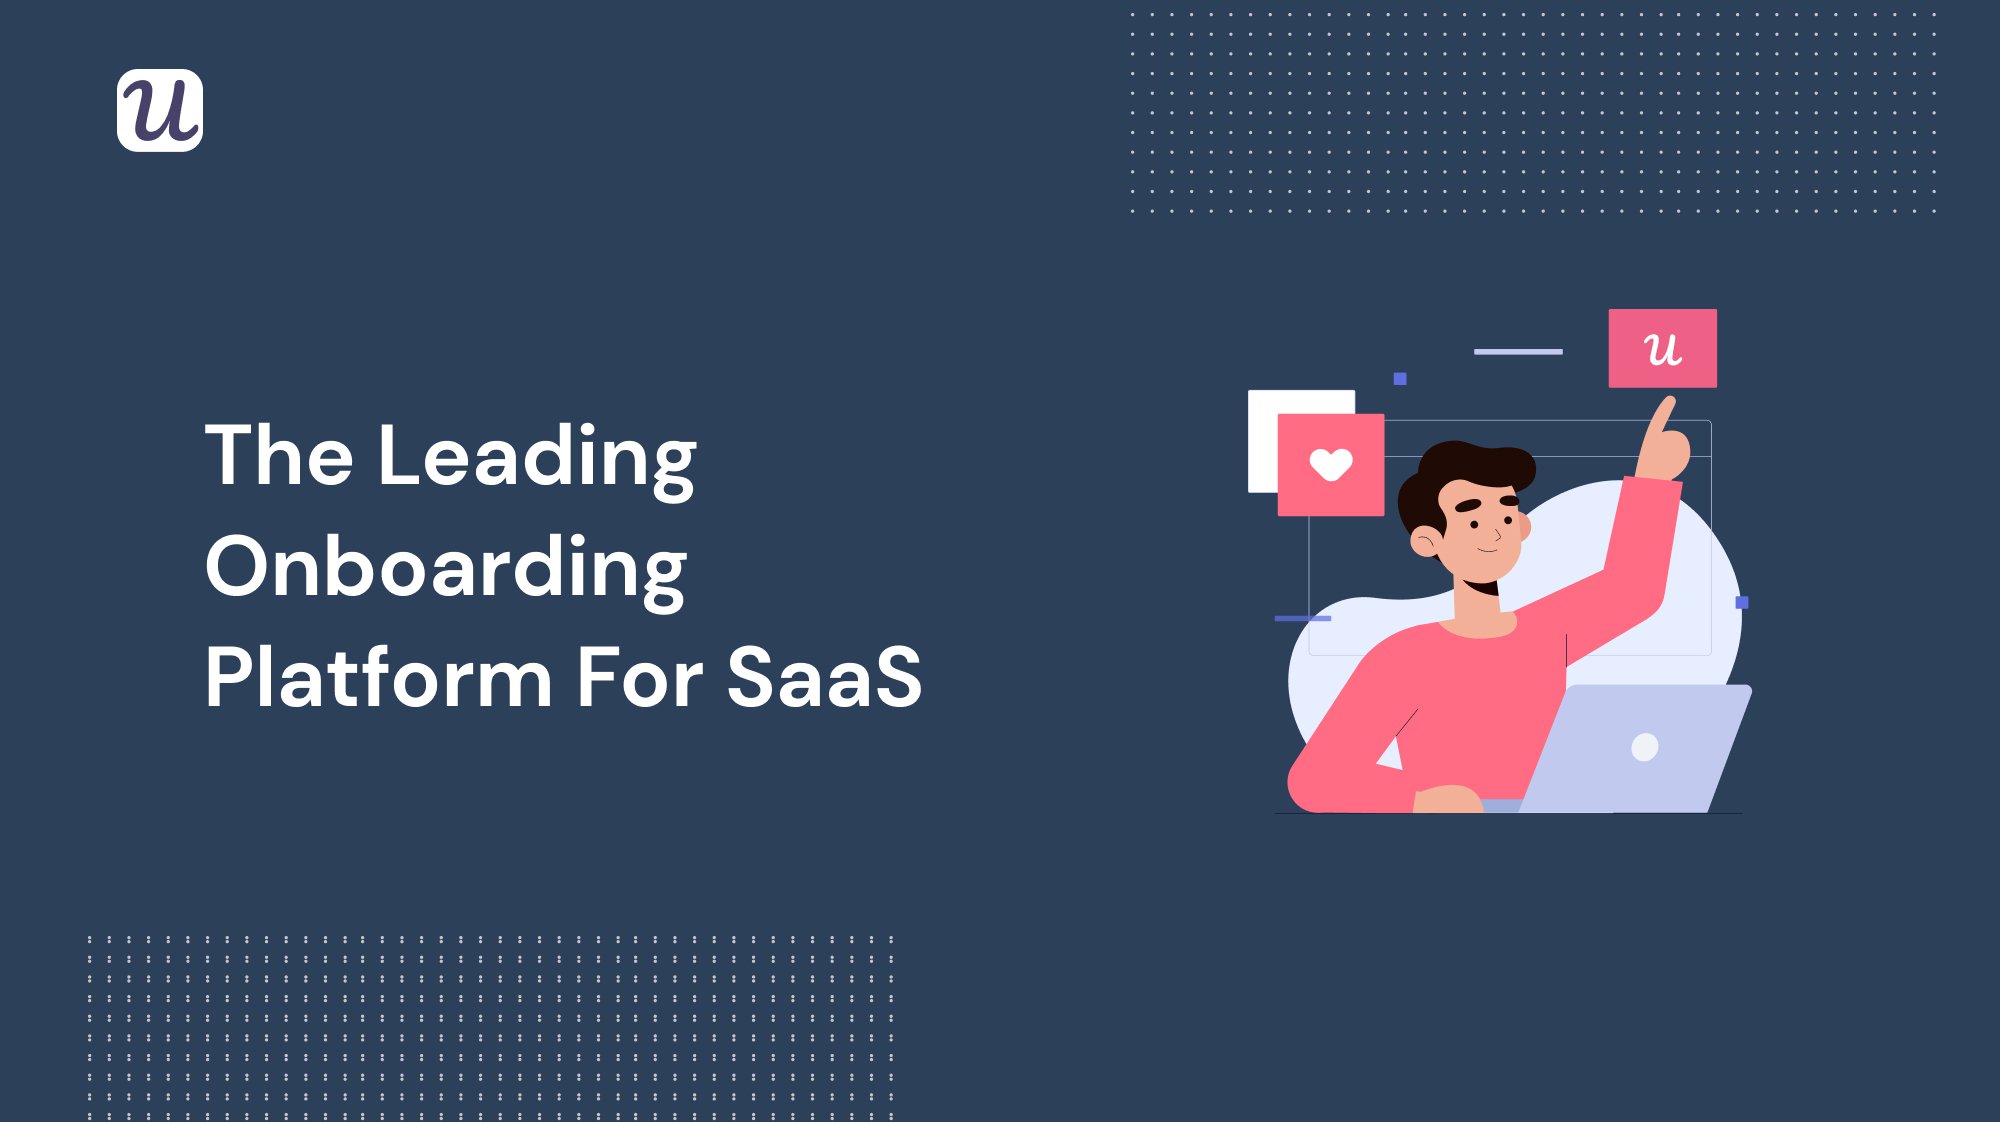 The Leading Onboarding Platforms for SaaS in 2021